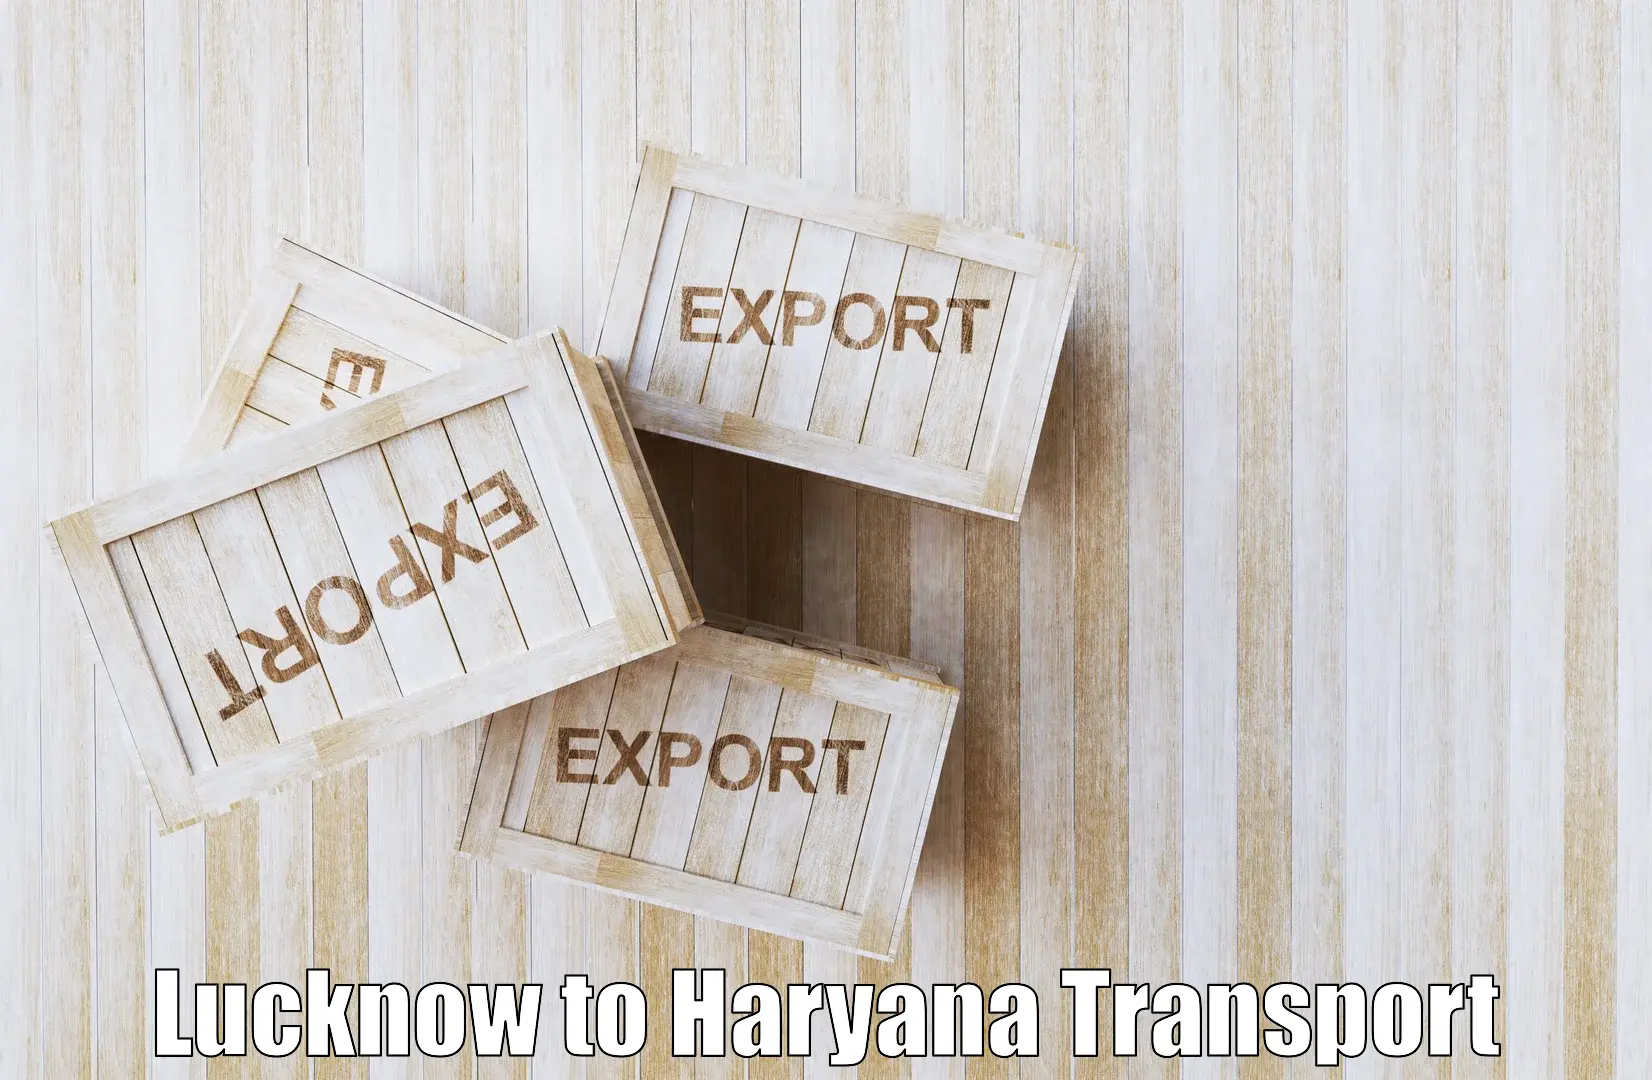 Vehicle transport services Lucknow to NCR Haryana